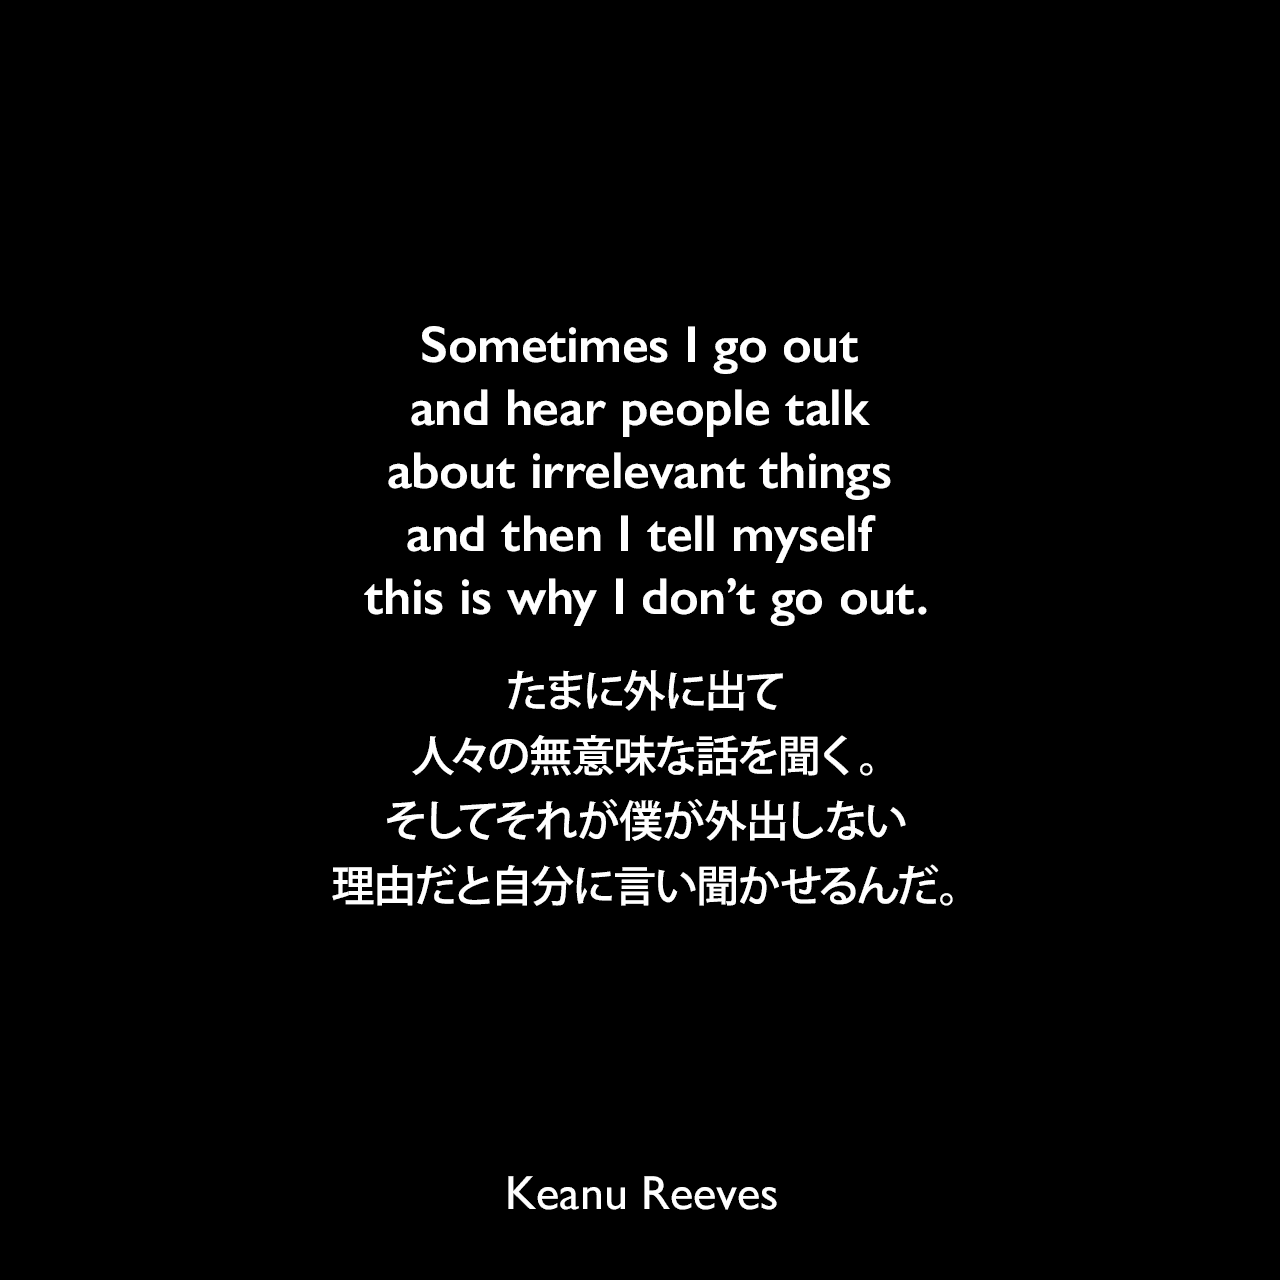 Sometimes I go out and hear people talk about irrelevant things and then I tell myself this is why I don’t go out.たまに外に出て人々の無意味な話を聞く。そしてそれが僕が外出しない理由だと自分に言い聞かせるんだ。Keanu Reeves